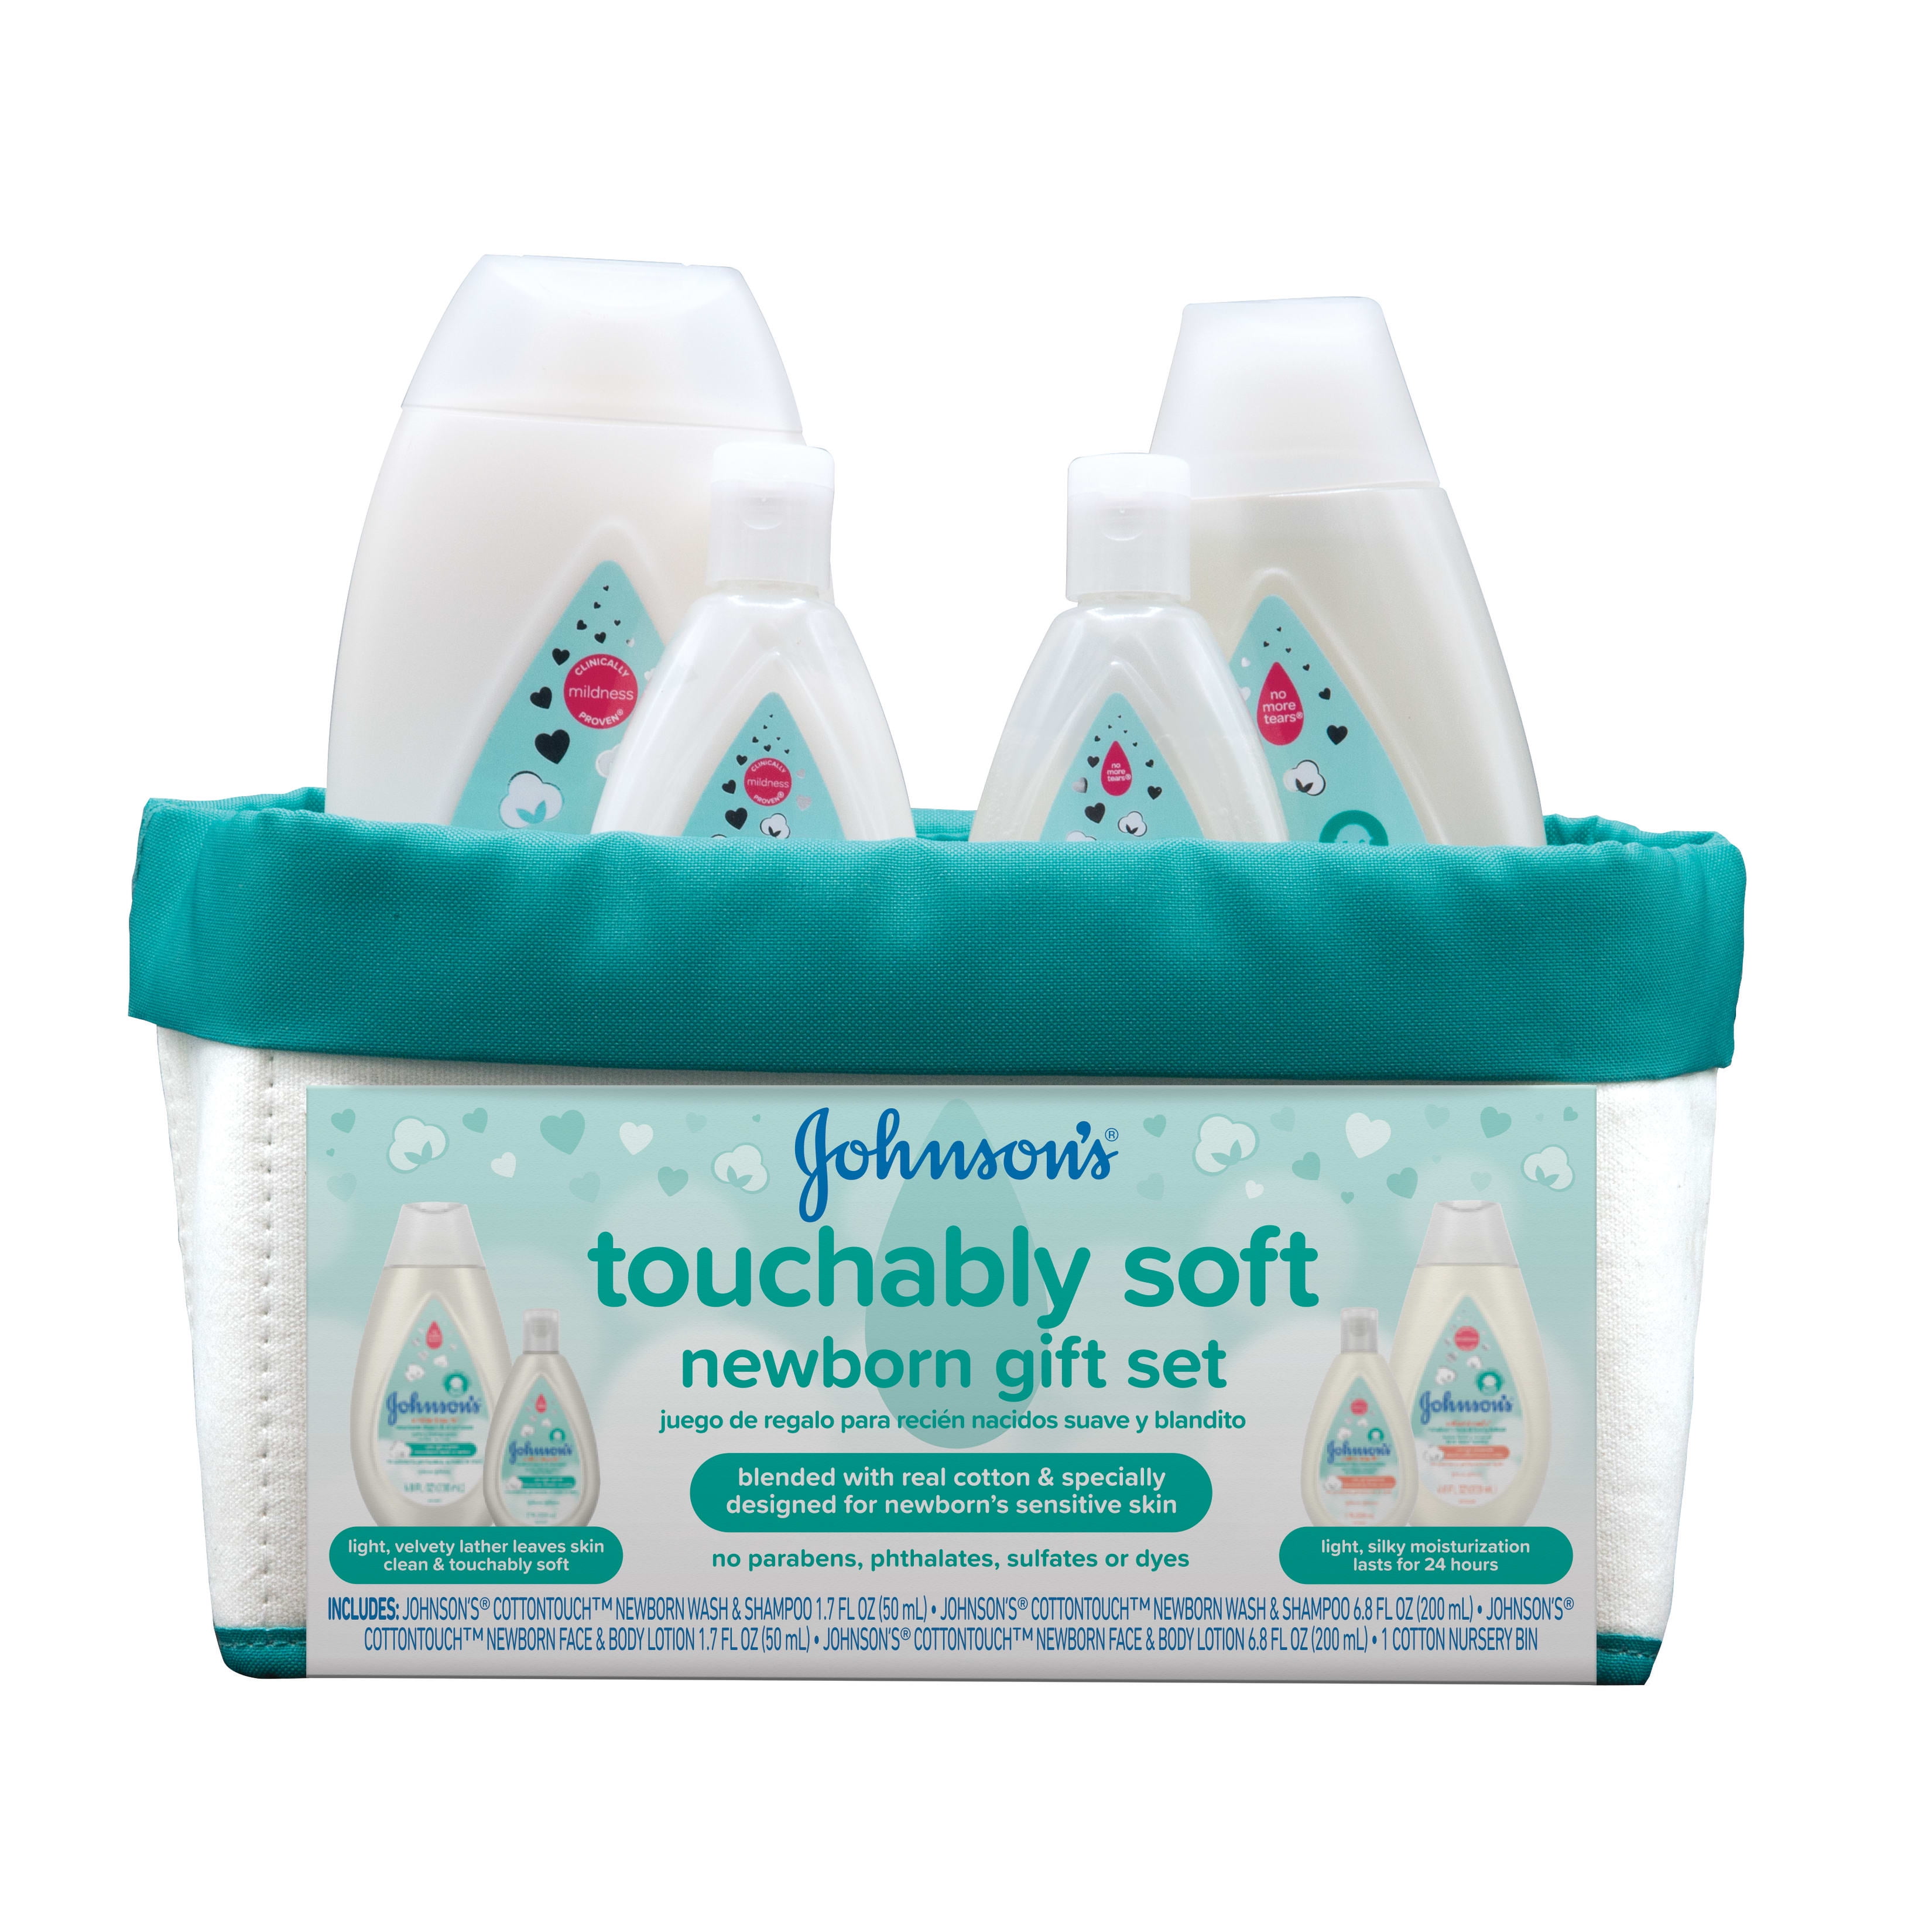 Johnsons Touchably Soft Newborn Baby T Set For New Parents 5 Item